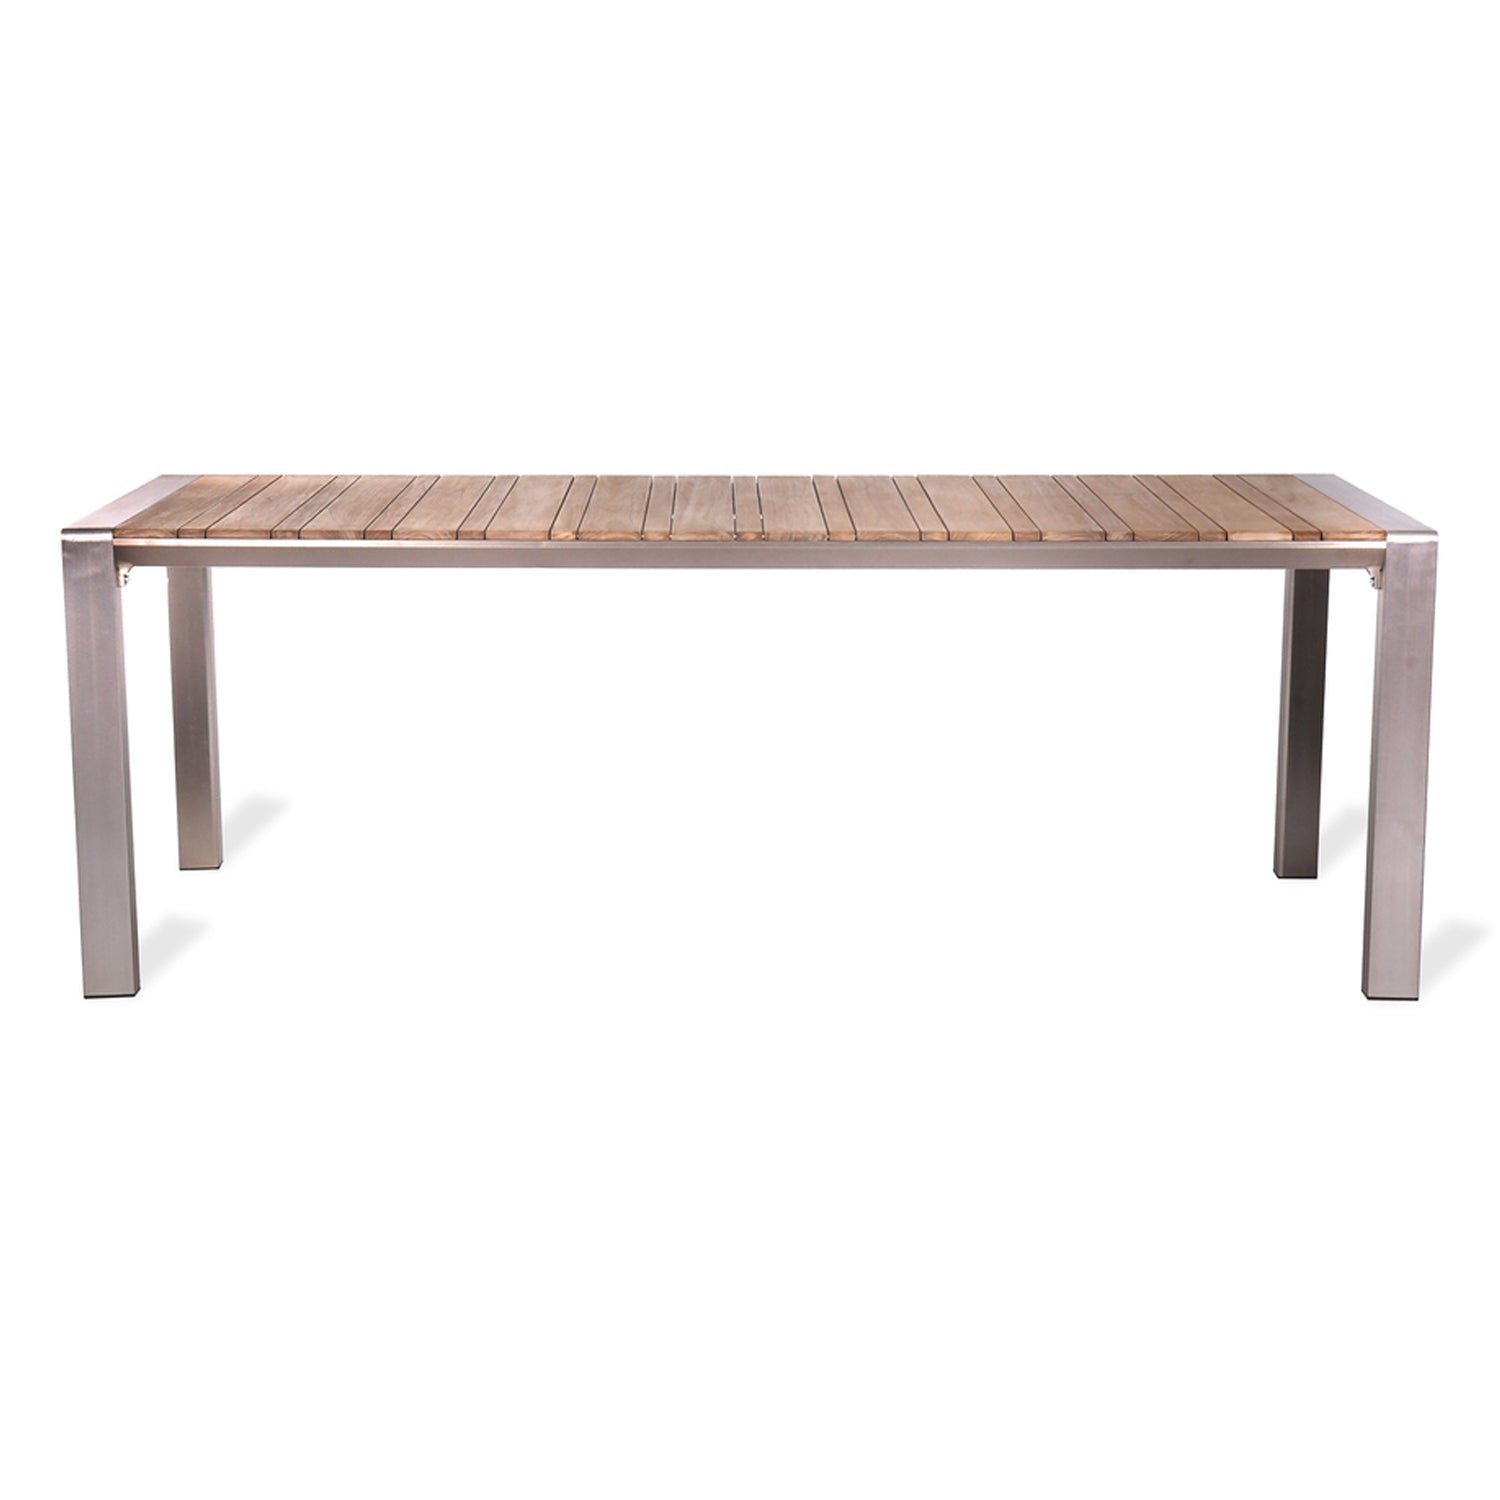 Ashby Outdoor Table Large in Silver Aluminium & Teak by Garden Trading